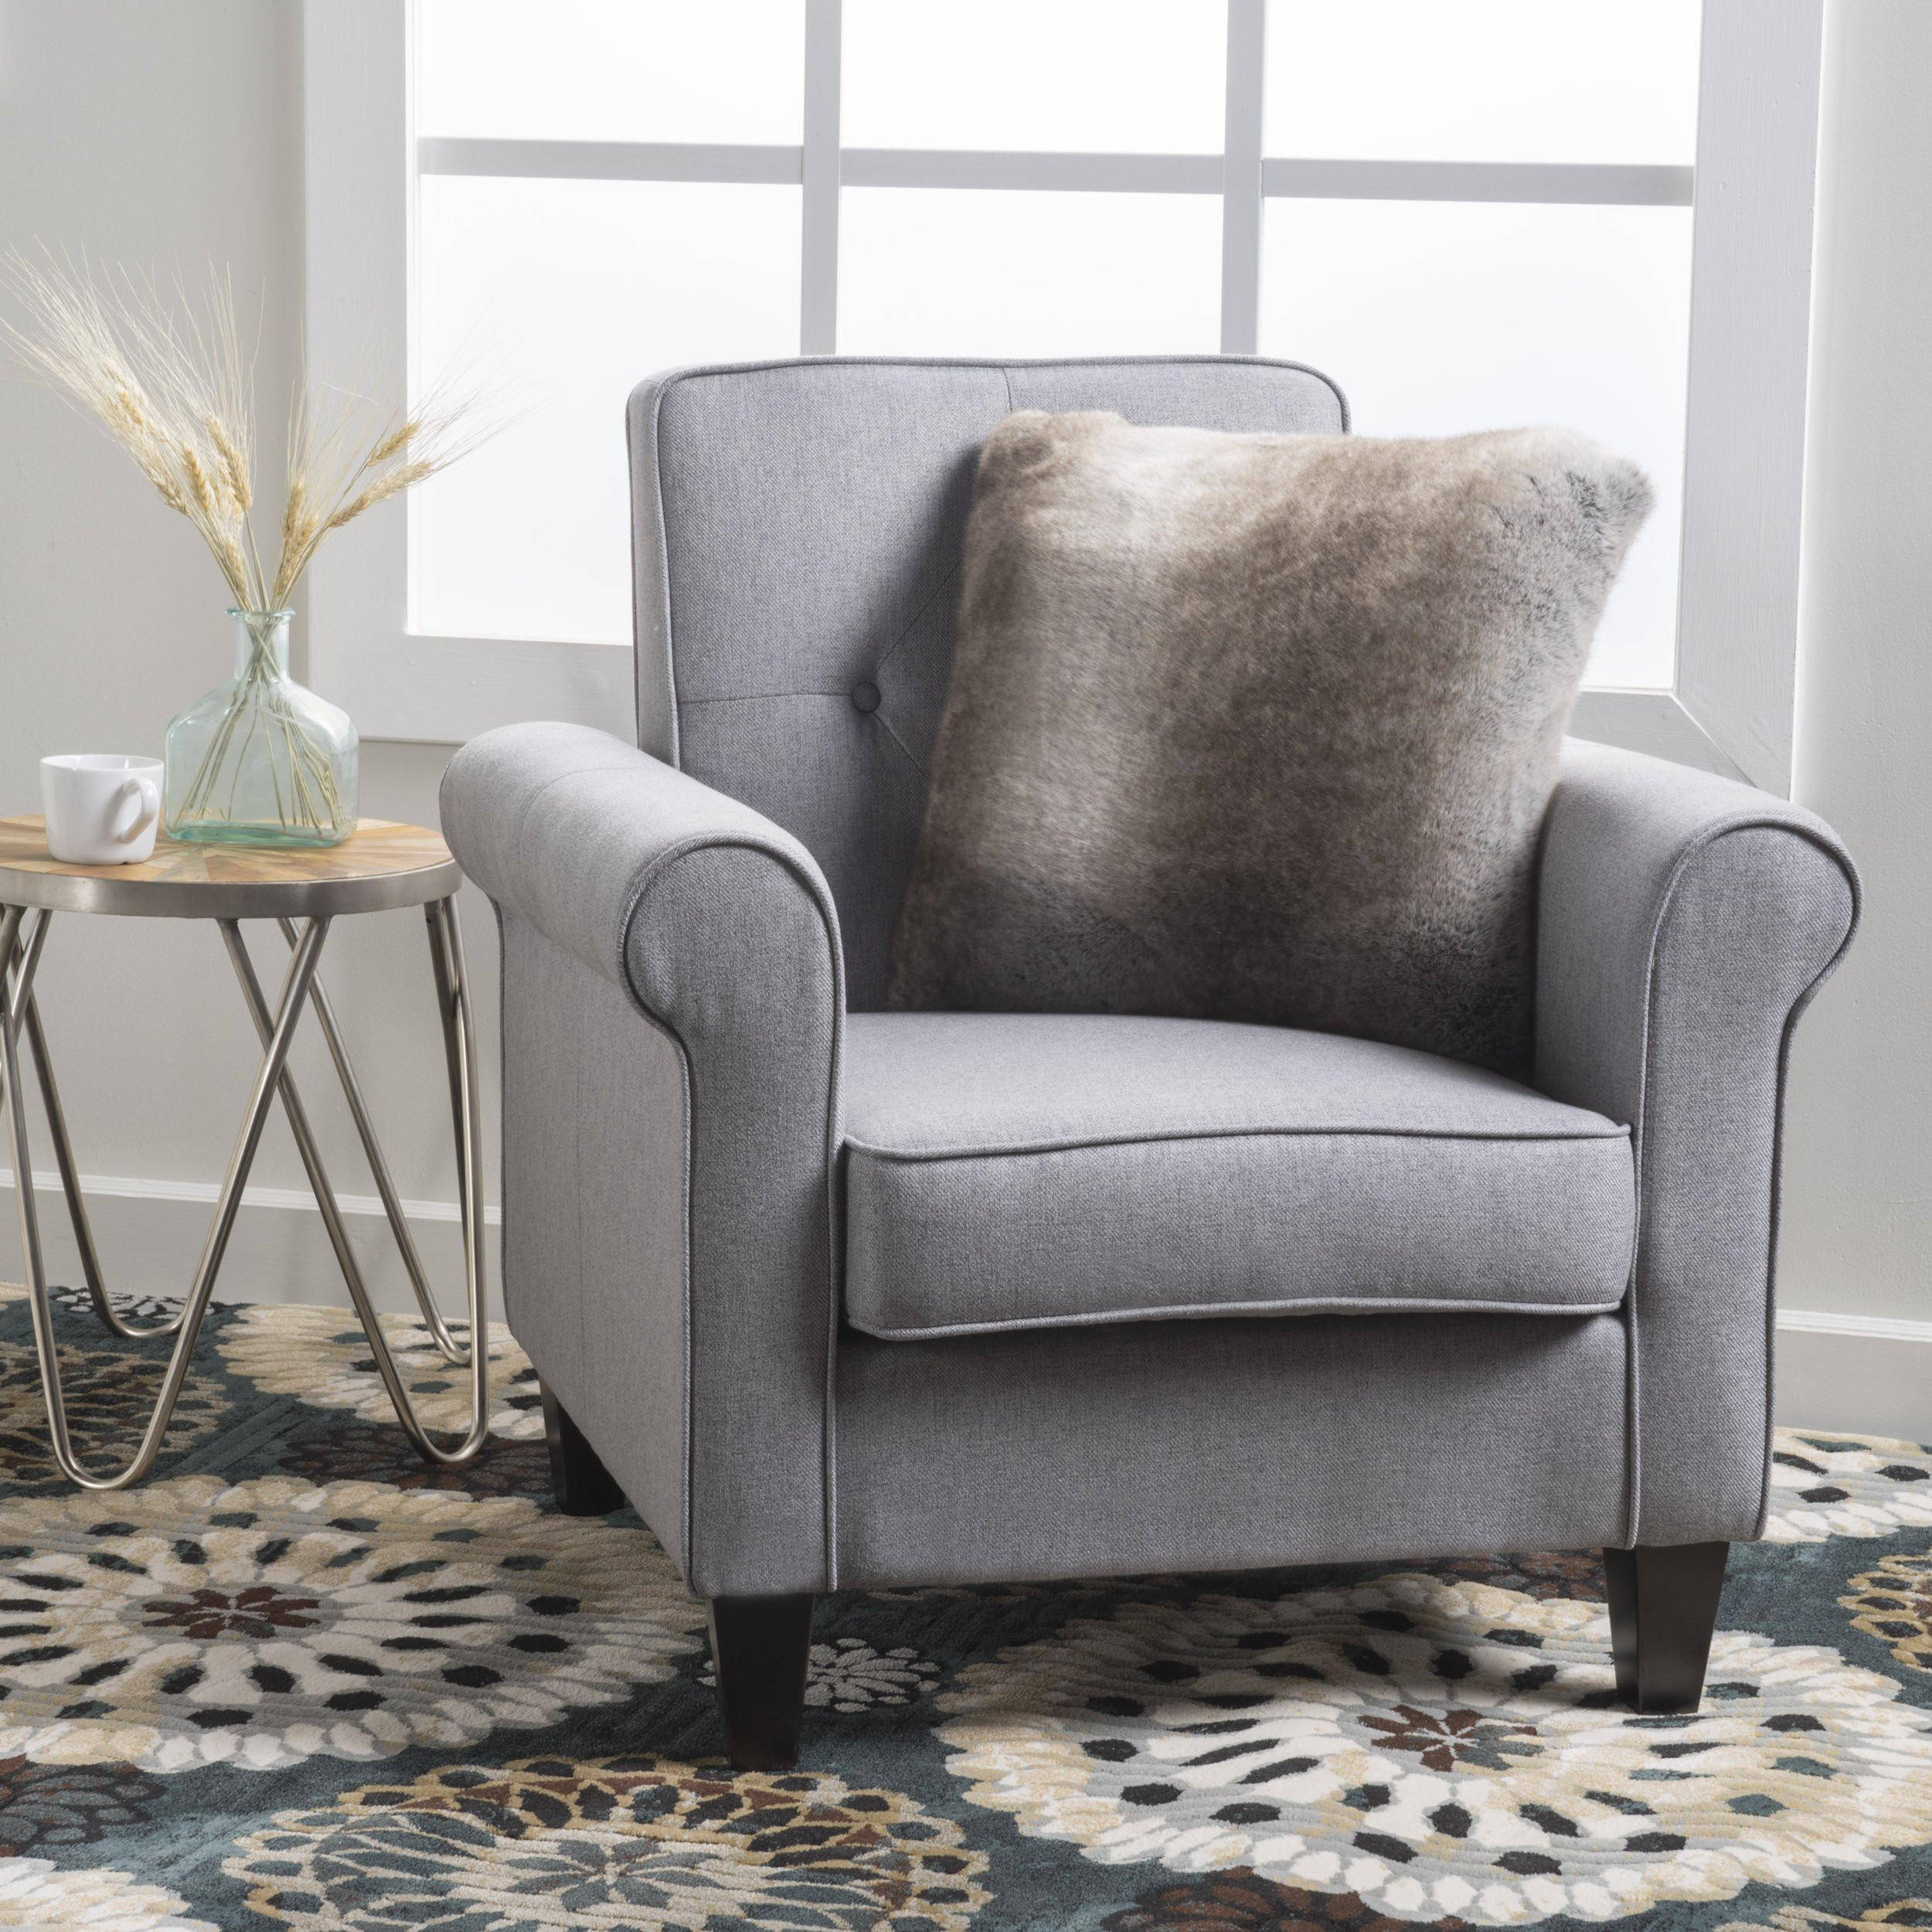 Small Living Room Chair
 10 fortable Chairs for Small Spaces to Cozy Up Your